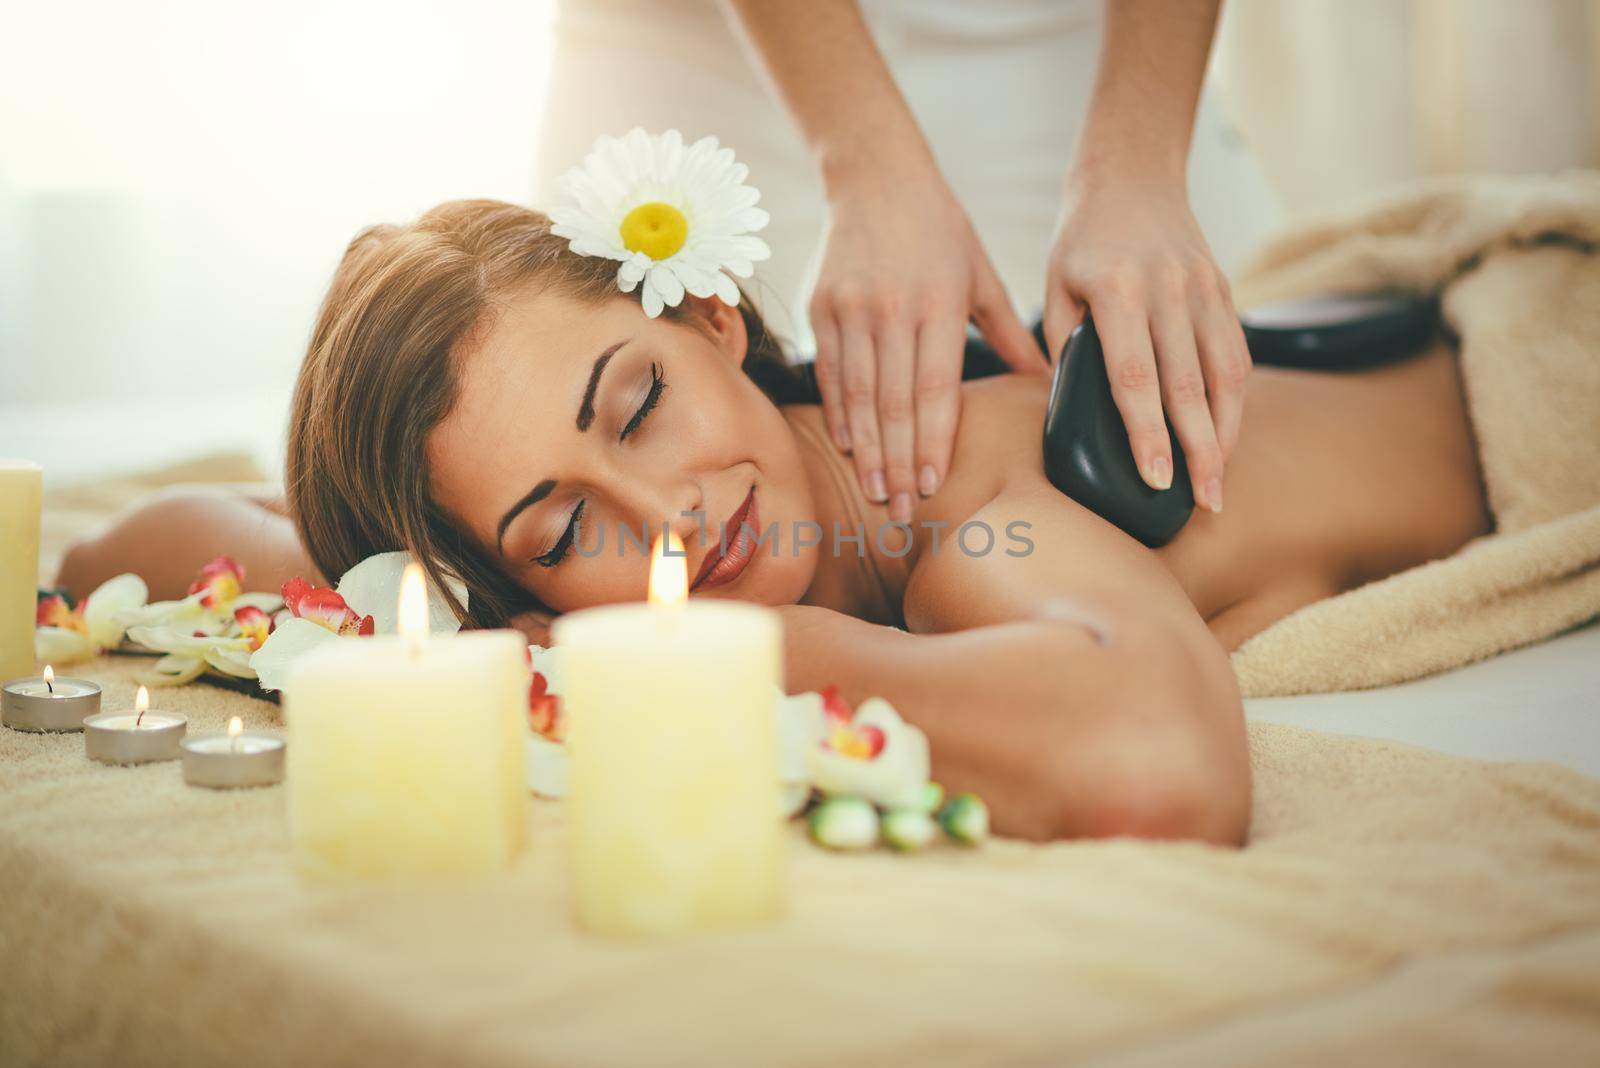 Cute young woman is enjoying during a back massage with warm stones at a spa.